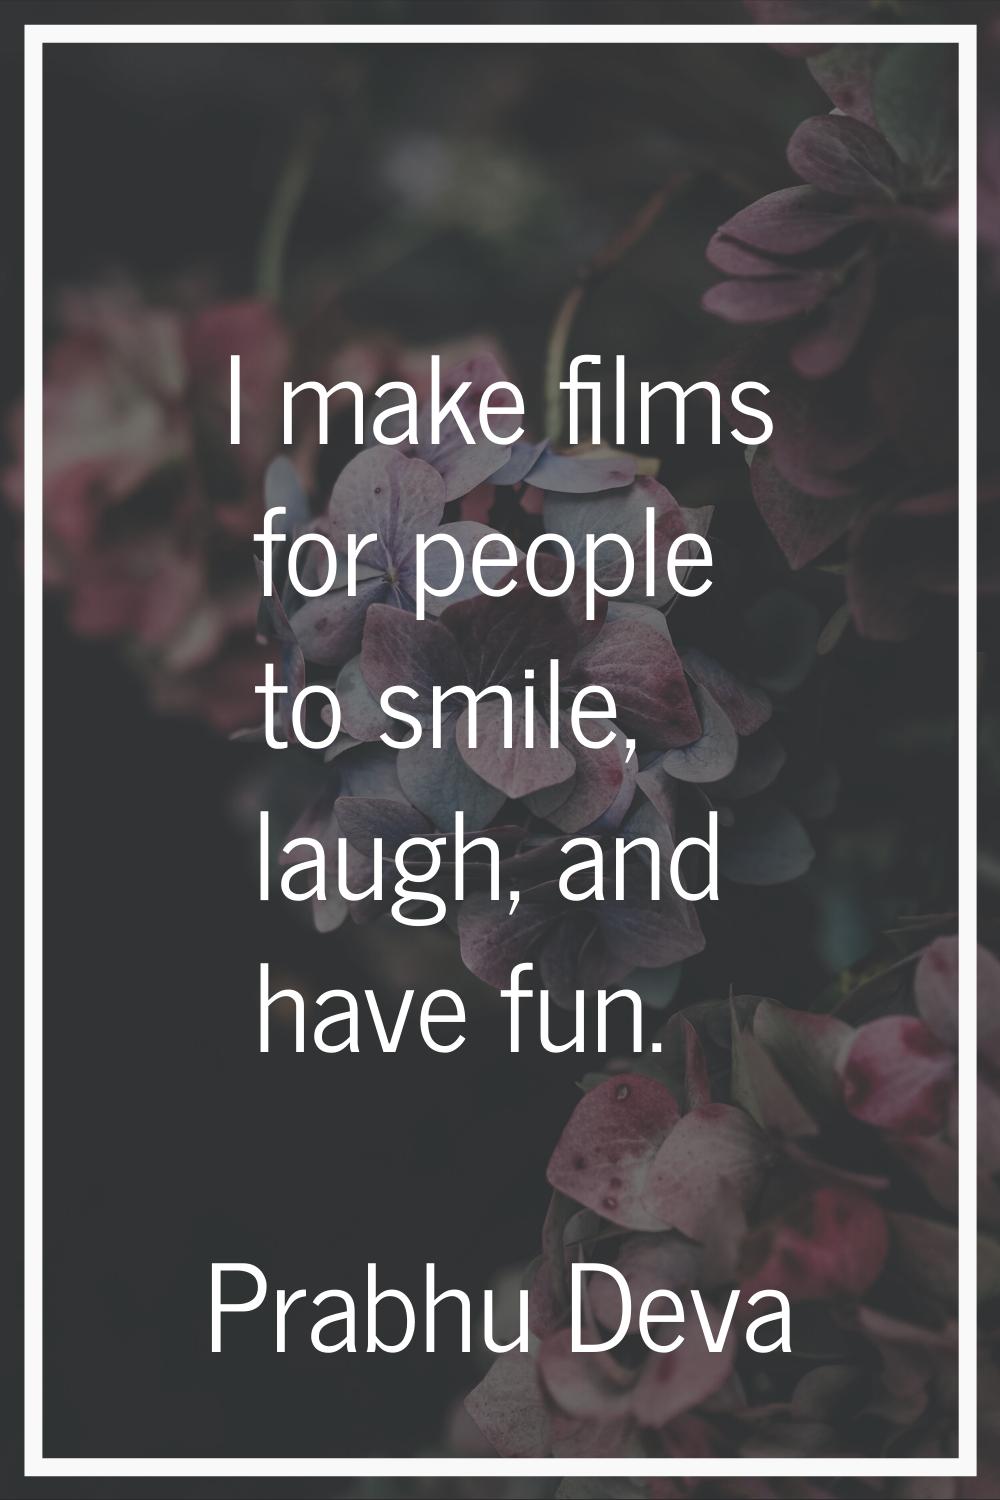 I make films for people to smile, laugh, and have fun.